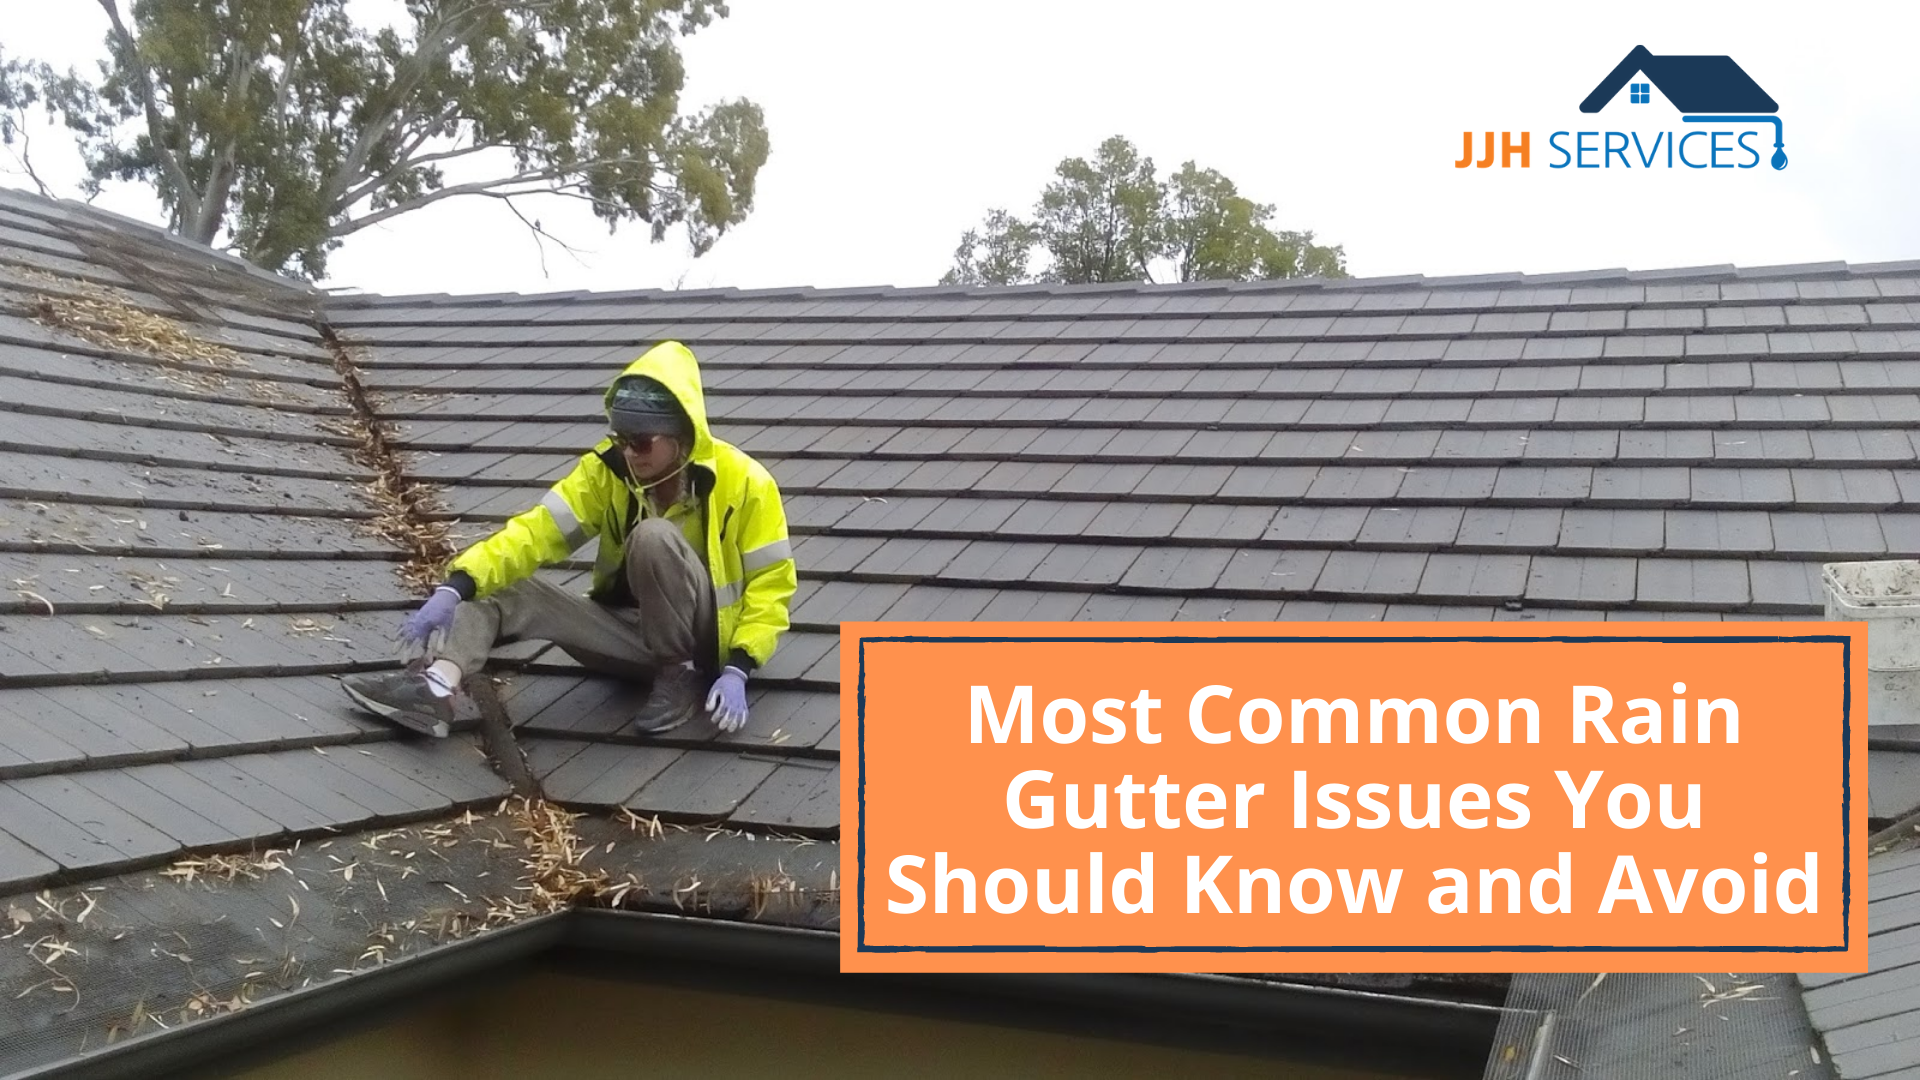 Most Common Rain Gutter Issues You Should Know and Avoid